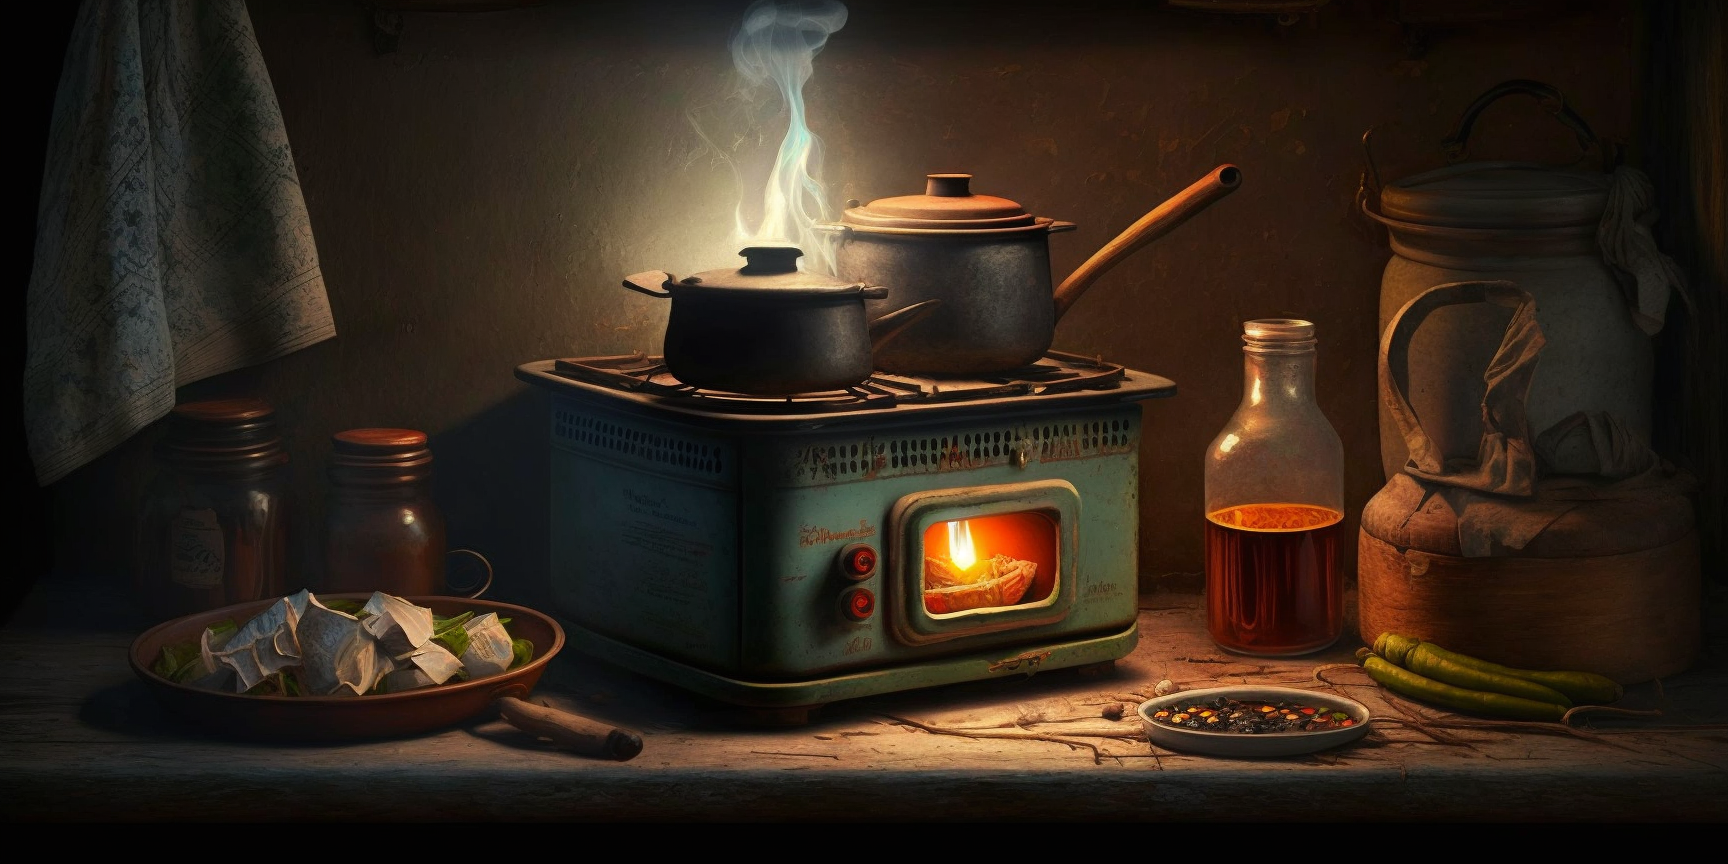 How to Cook Without Electricity